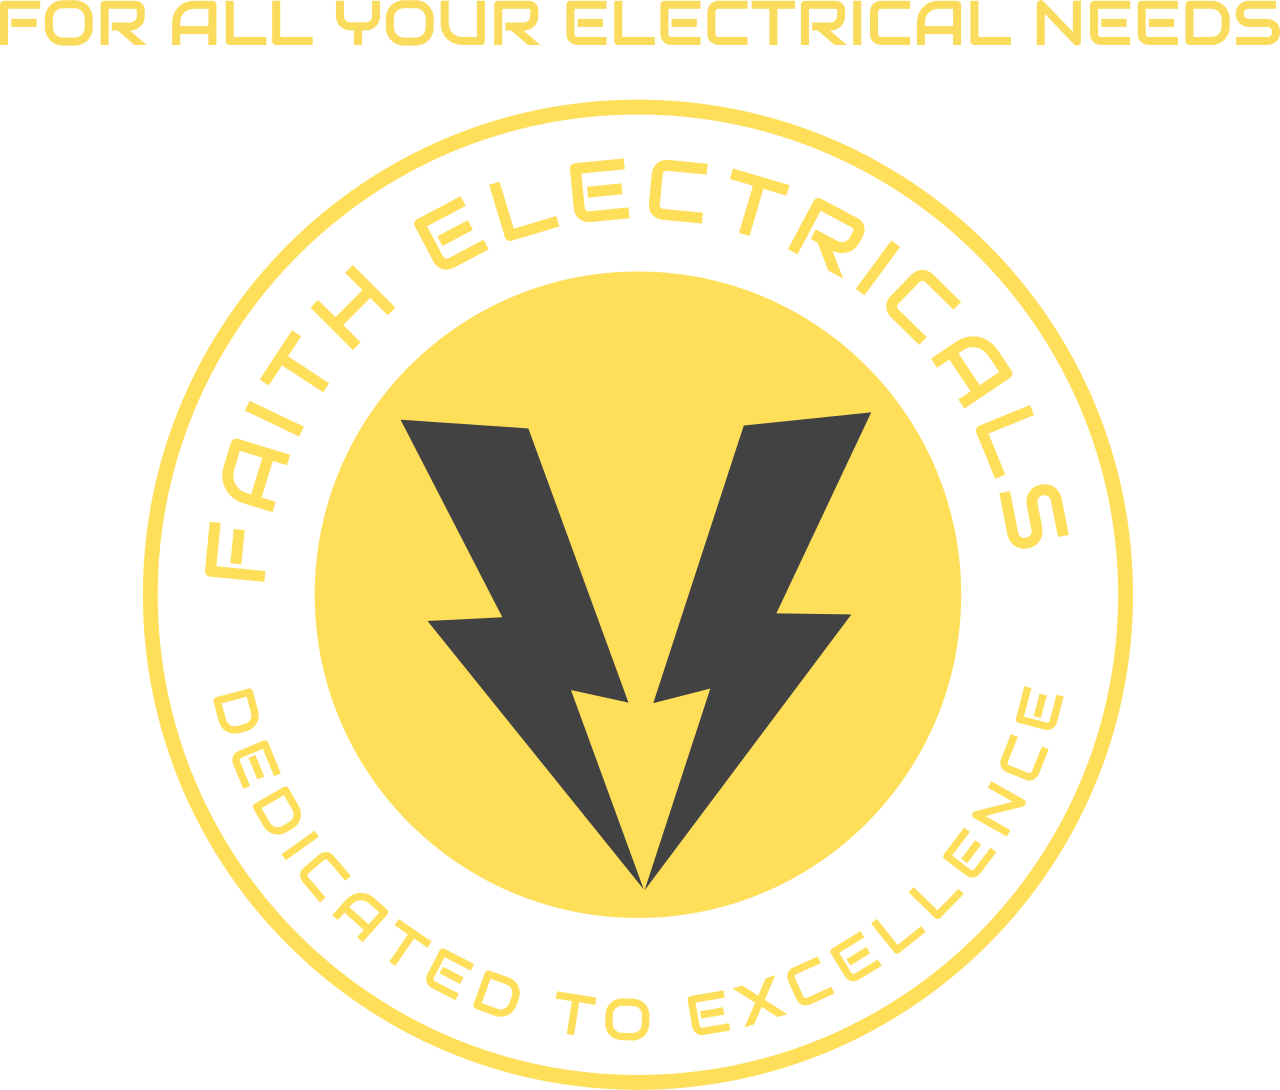 FAITH ELECTRICALS 's web page